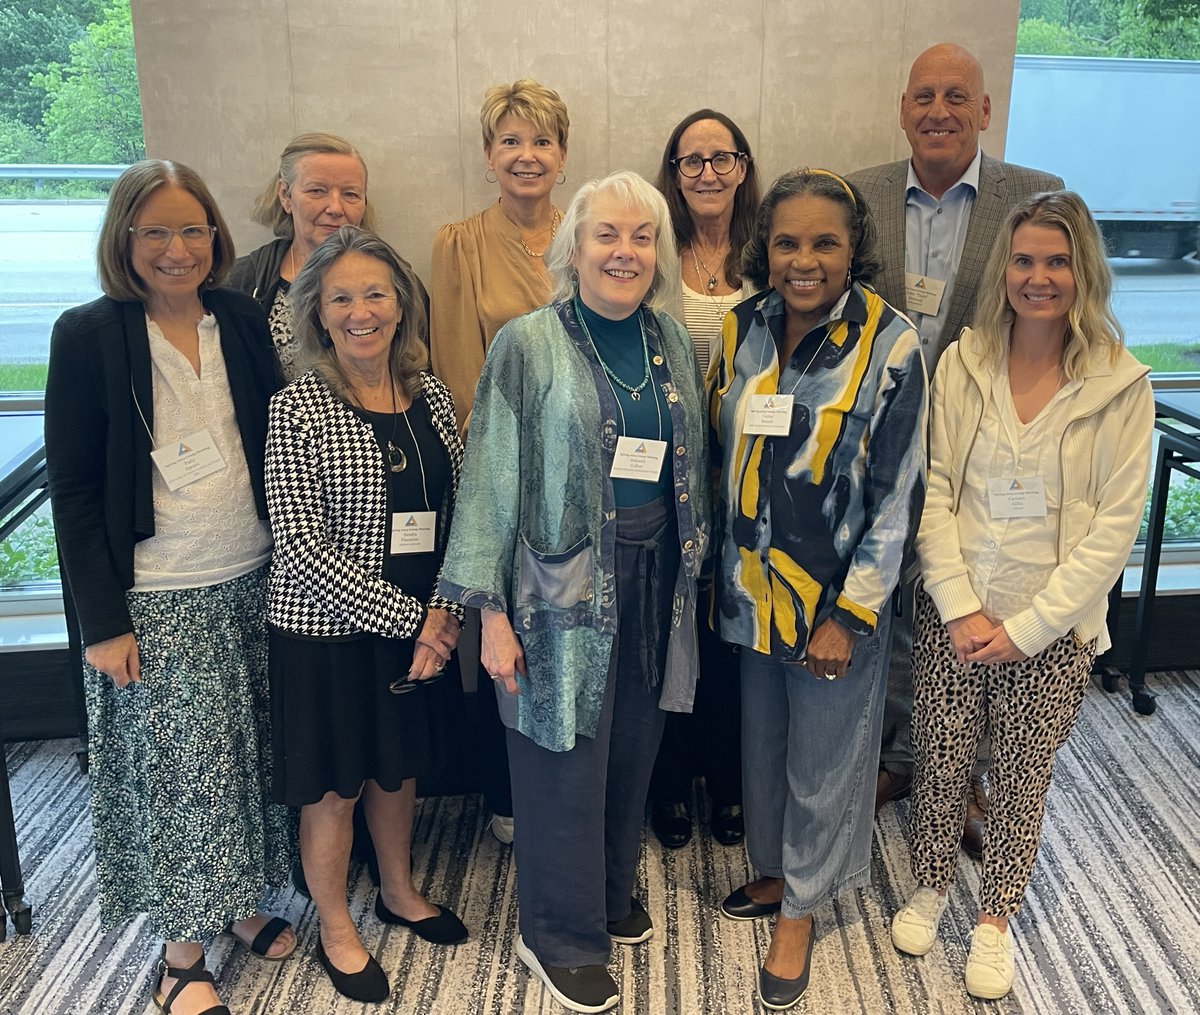 Hats off to the amazing @ALLIANCE_org Patient Advocate Committee led by @paspears88 Vernal Branch and Jane Perlmutter! #AllianceSpring24 #NCI #NCTN #NCORP #CancerResearch #patientadvocacy